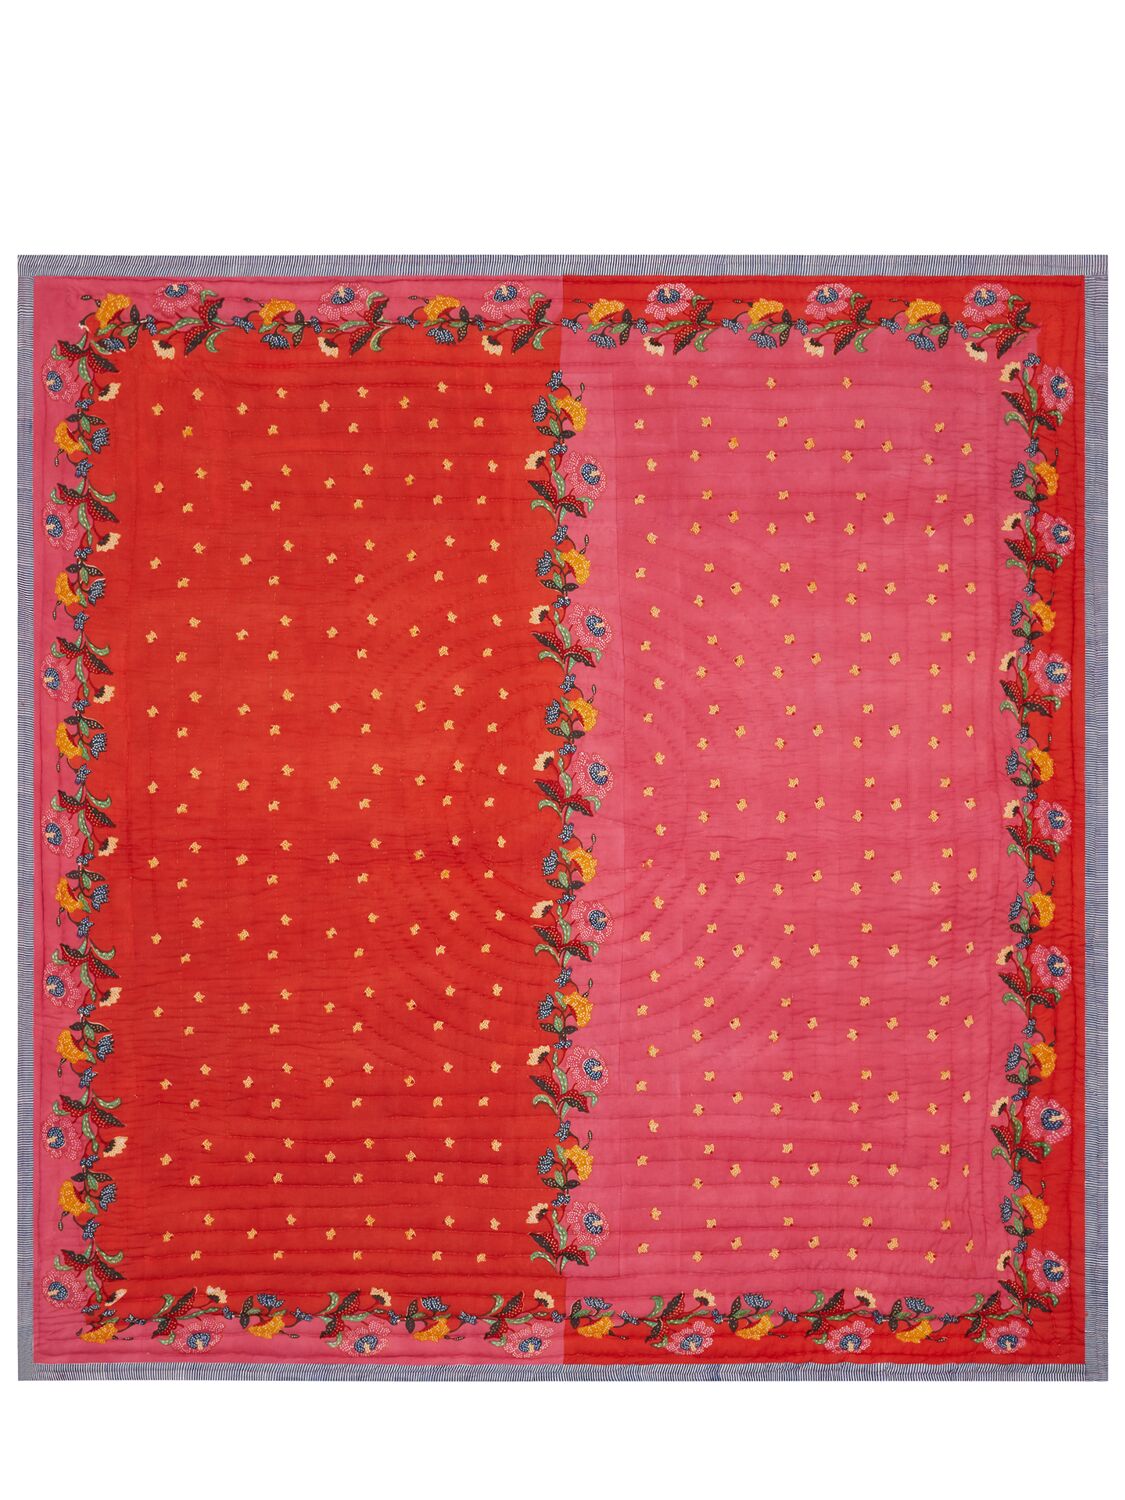 Lisa Corti Indonesian Red Rose Cotton Muslin Quilt